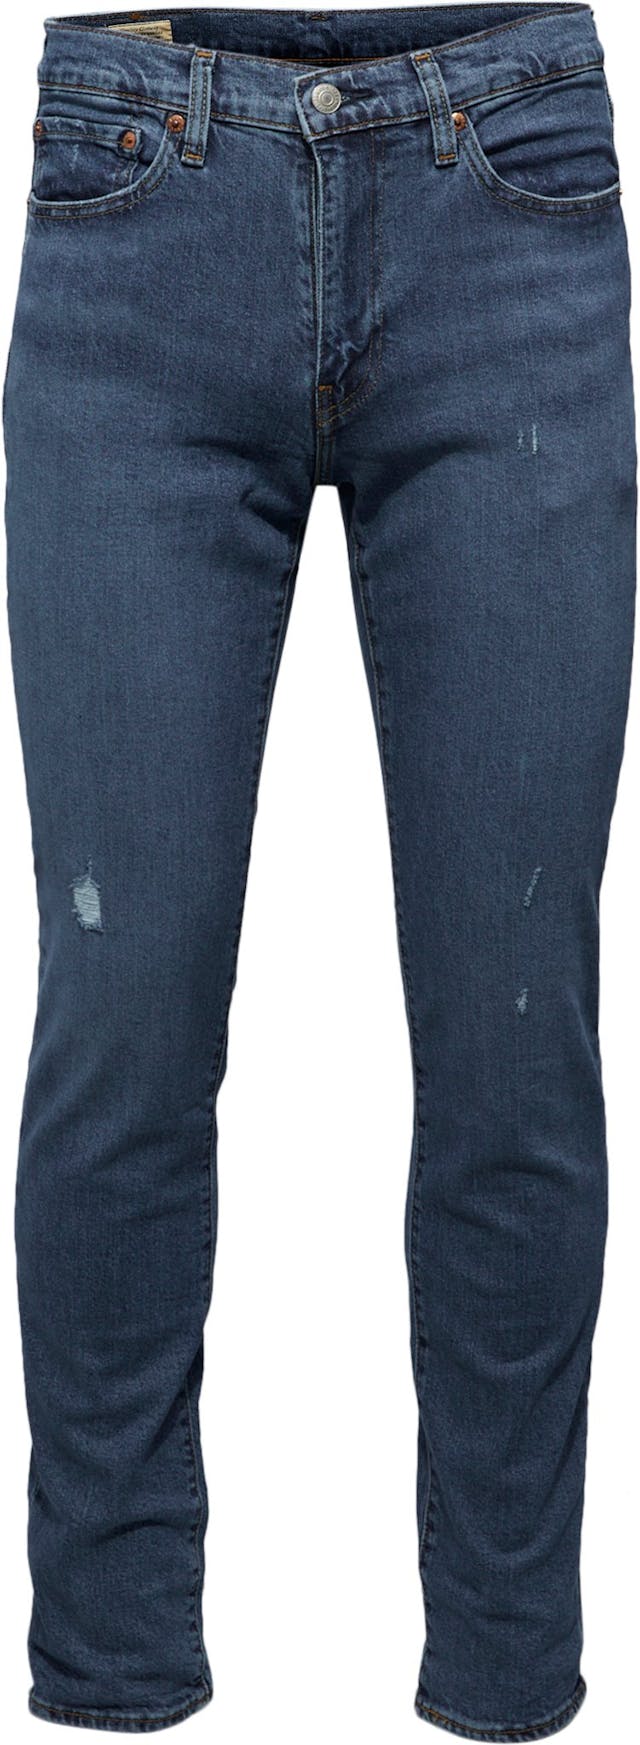 Product image for 511 Slim Fit Jeans - Men's